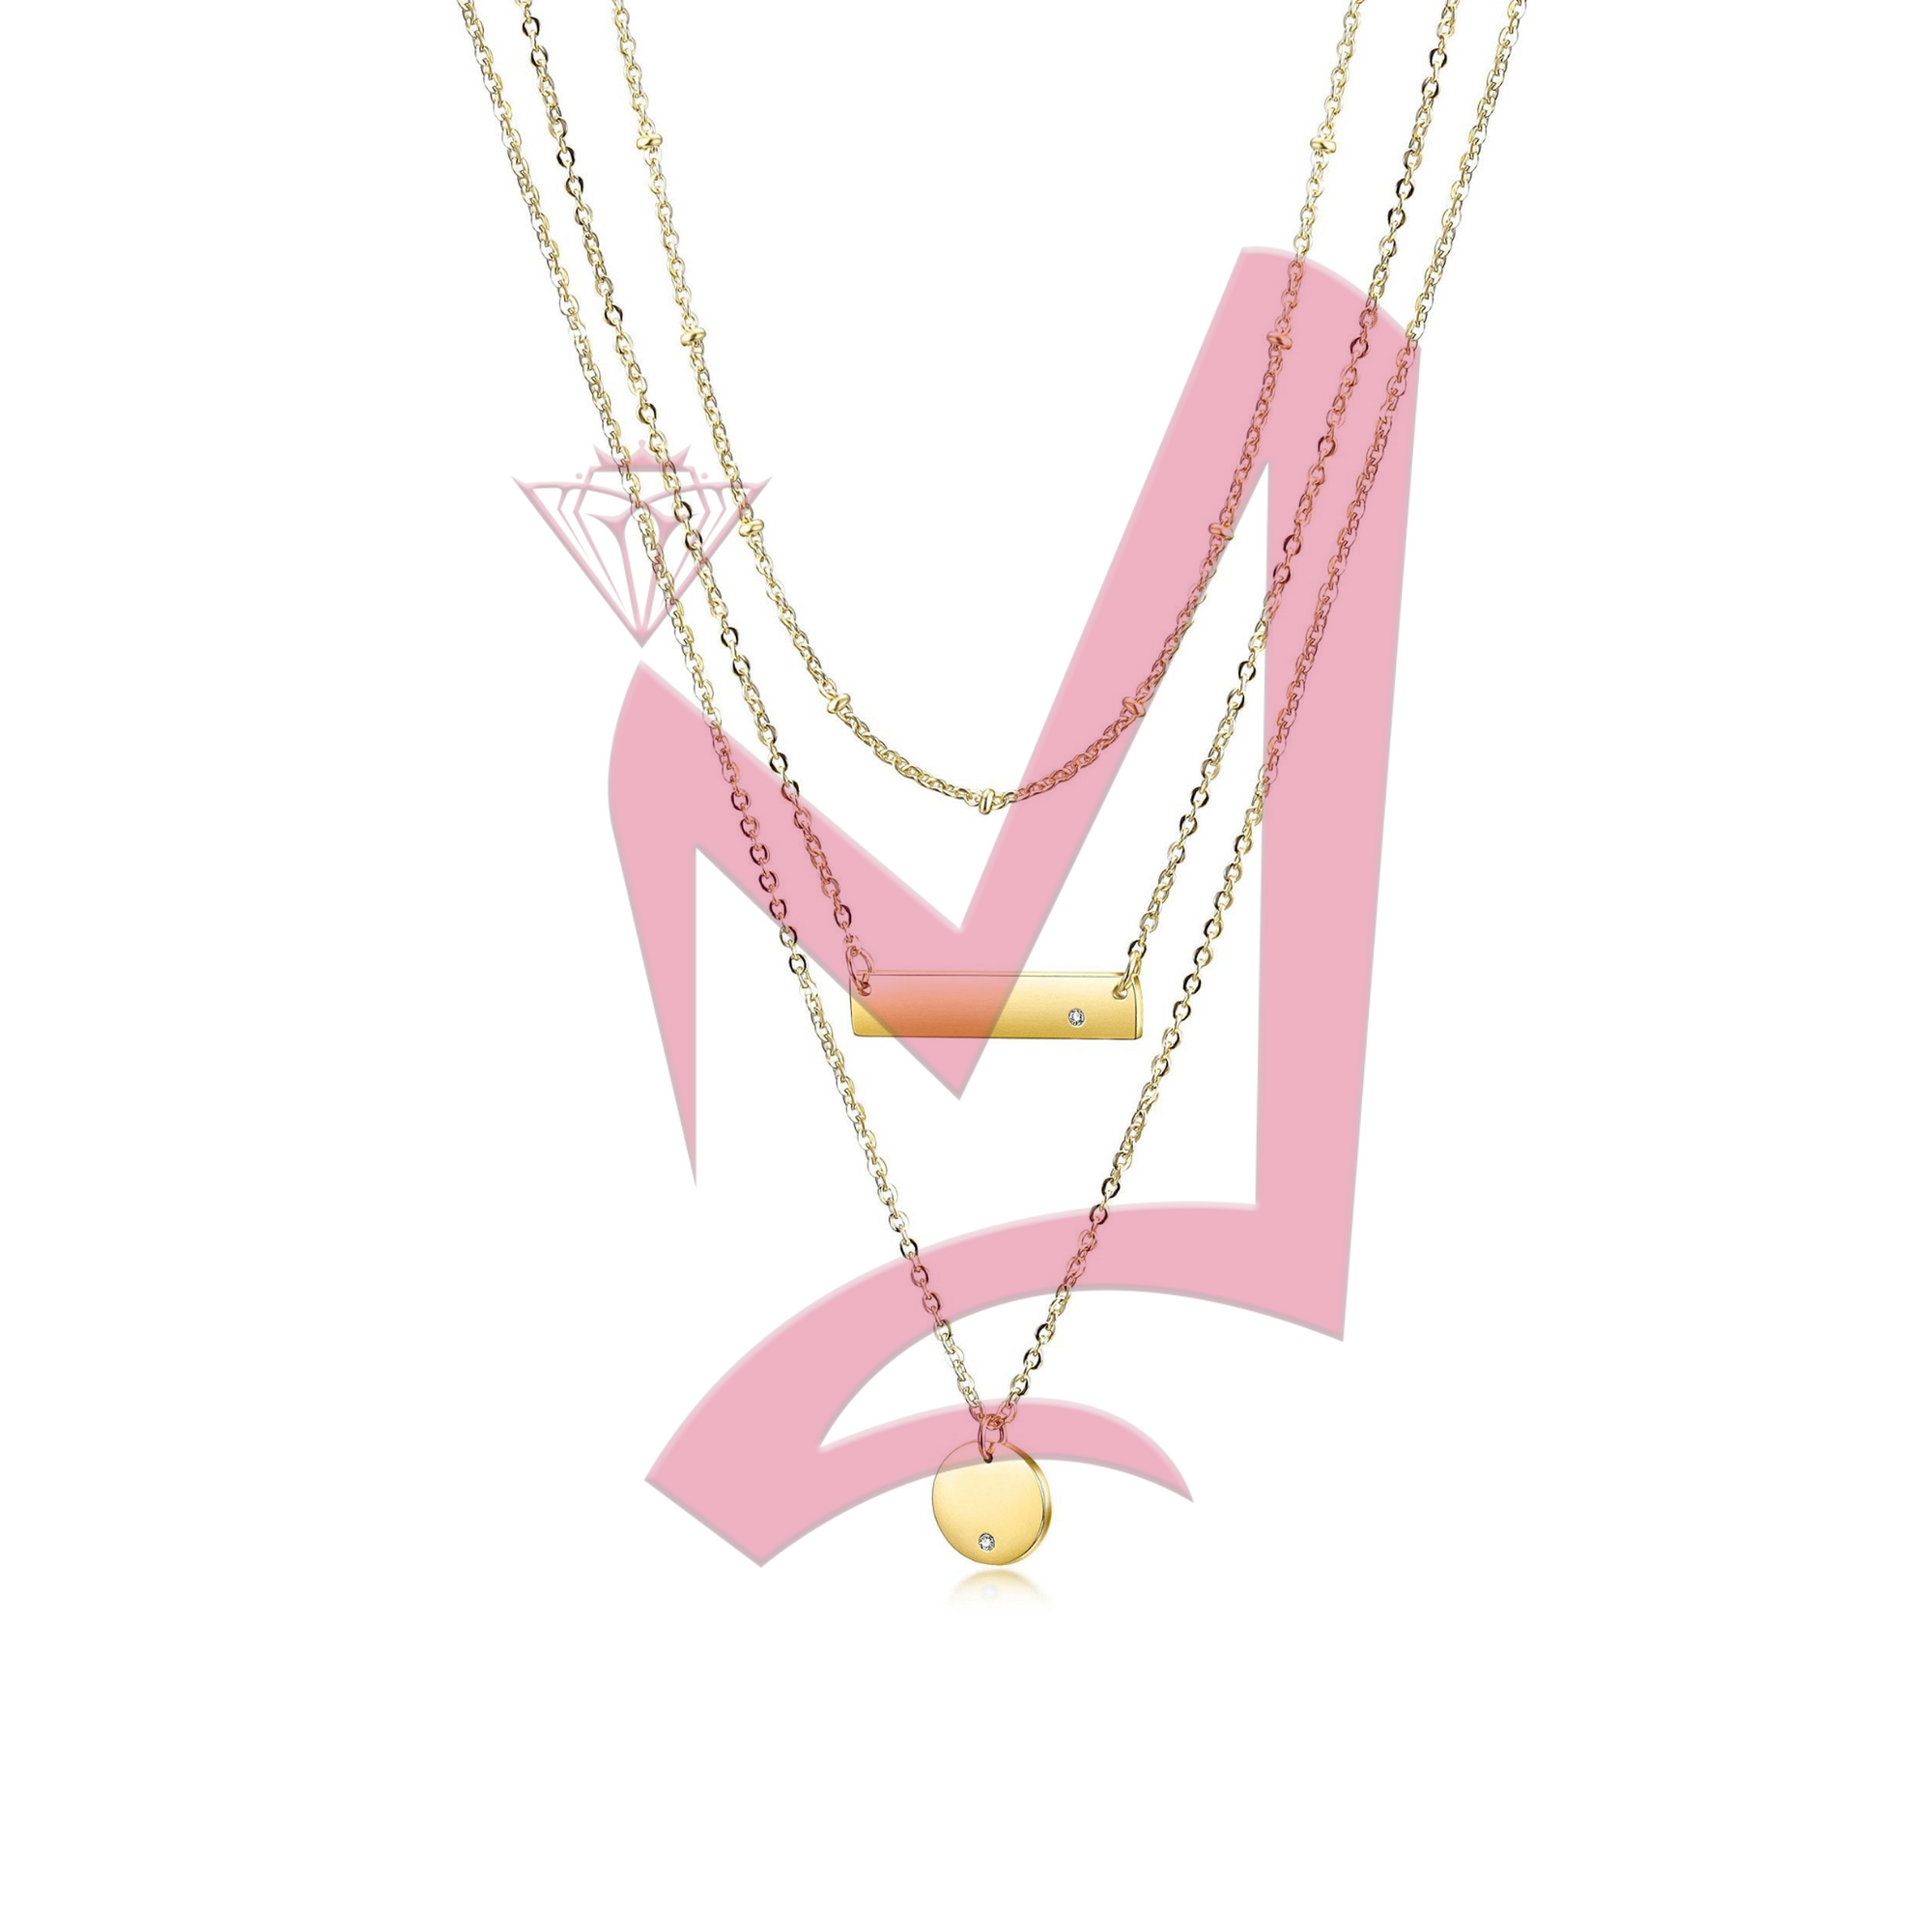 Triple Layer Pendant in 14K Plated Gold Necklace